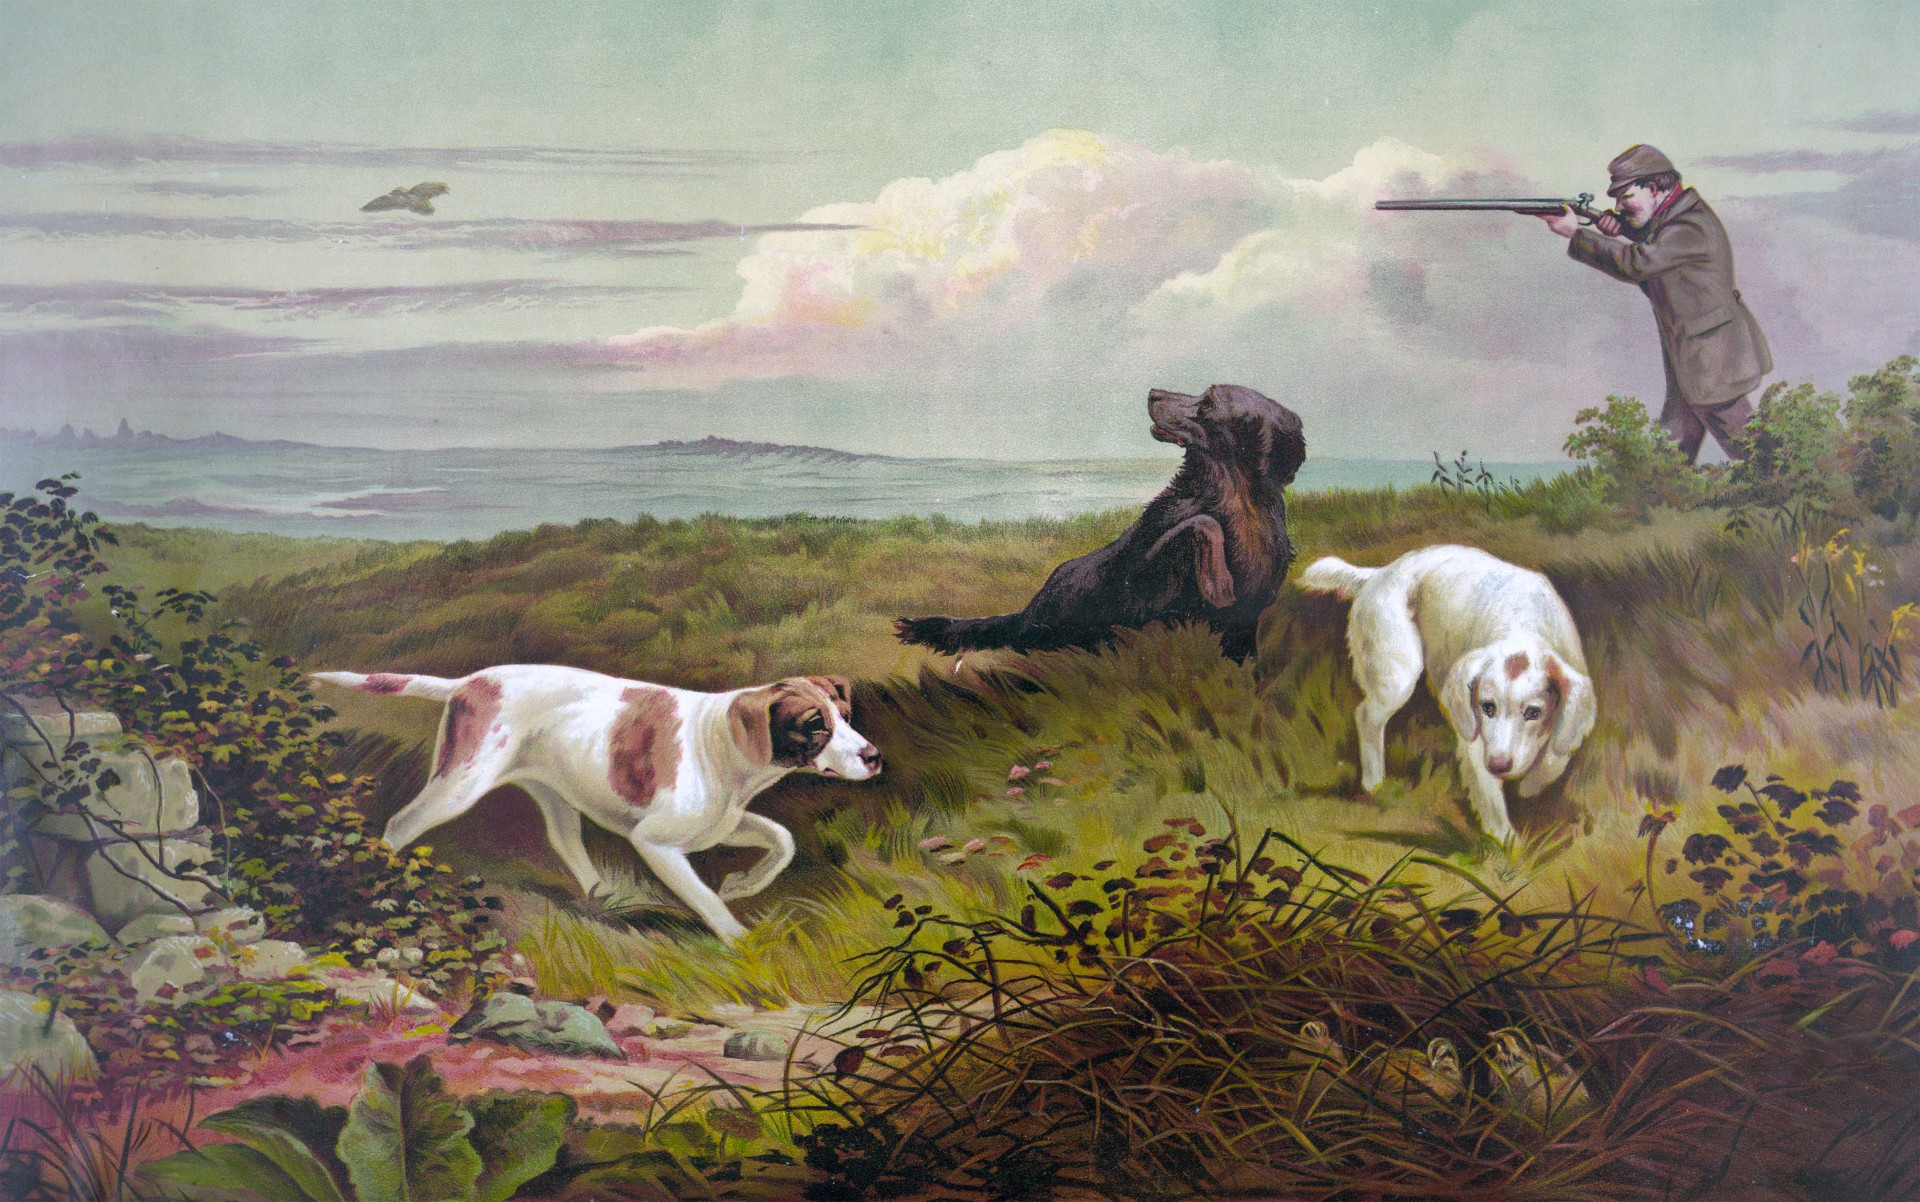 Public domain vintage painting of three dogs and a man shooting birds